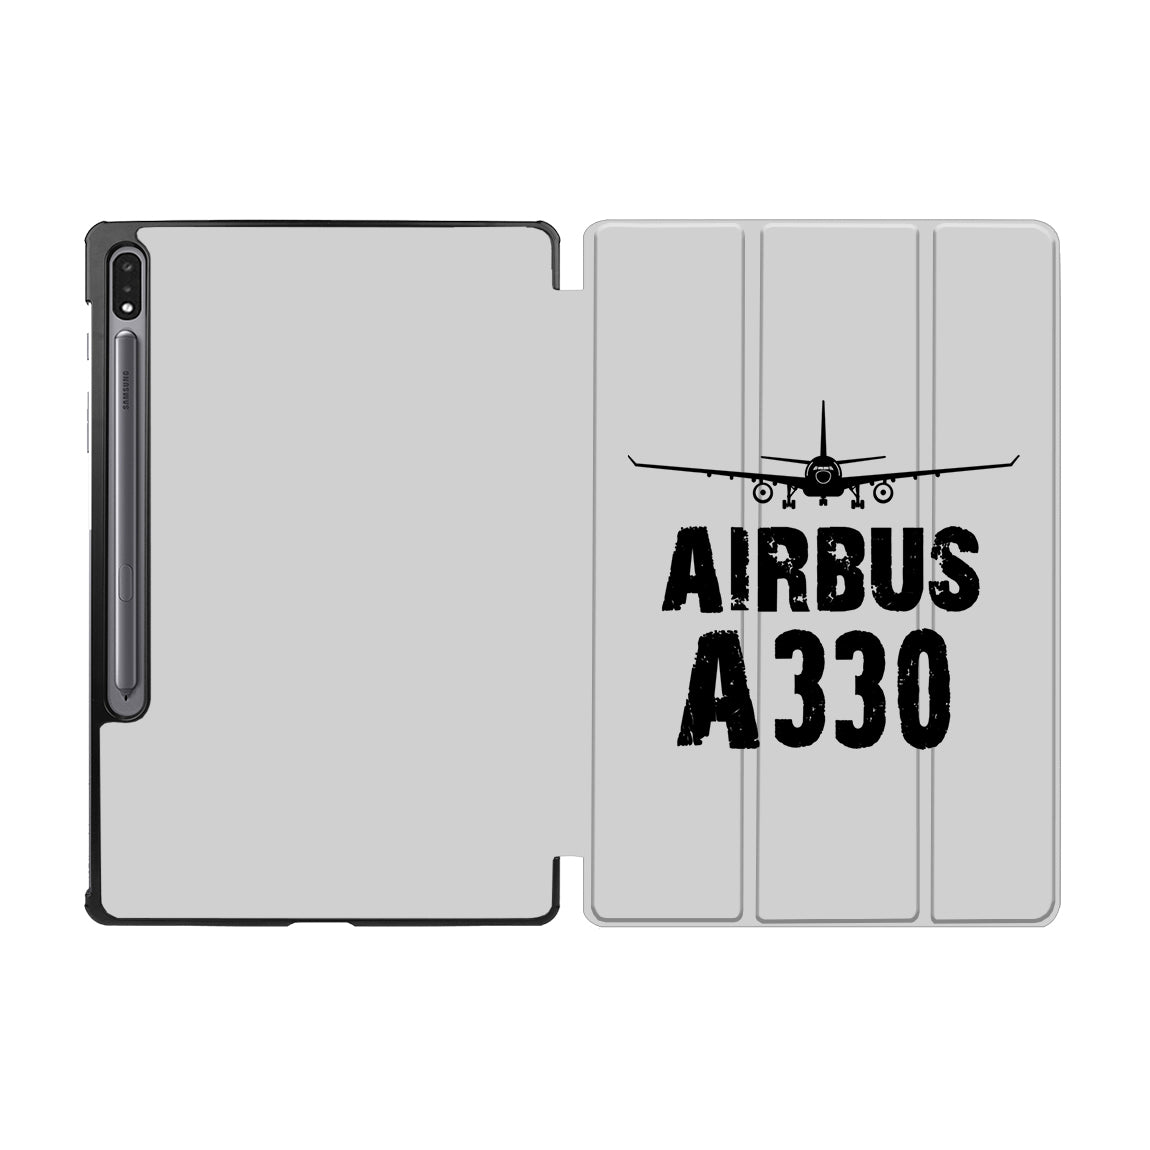 Airbus A330 & Plane Designed Samsung Tablet Cases